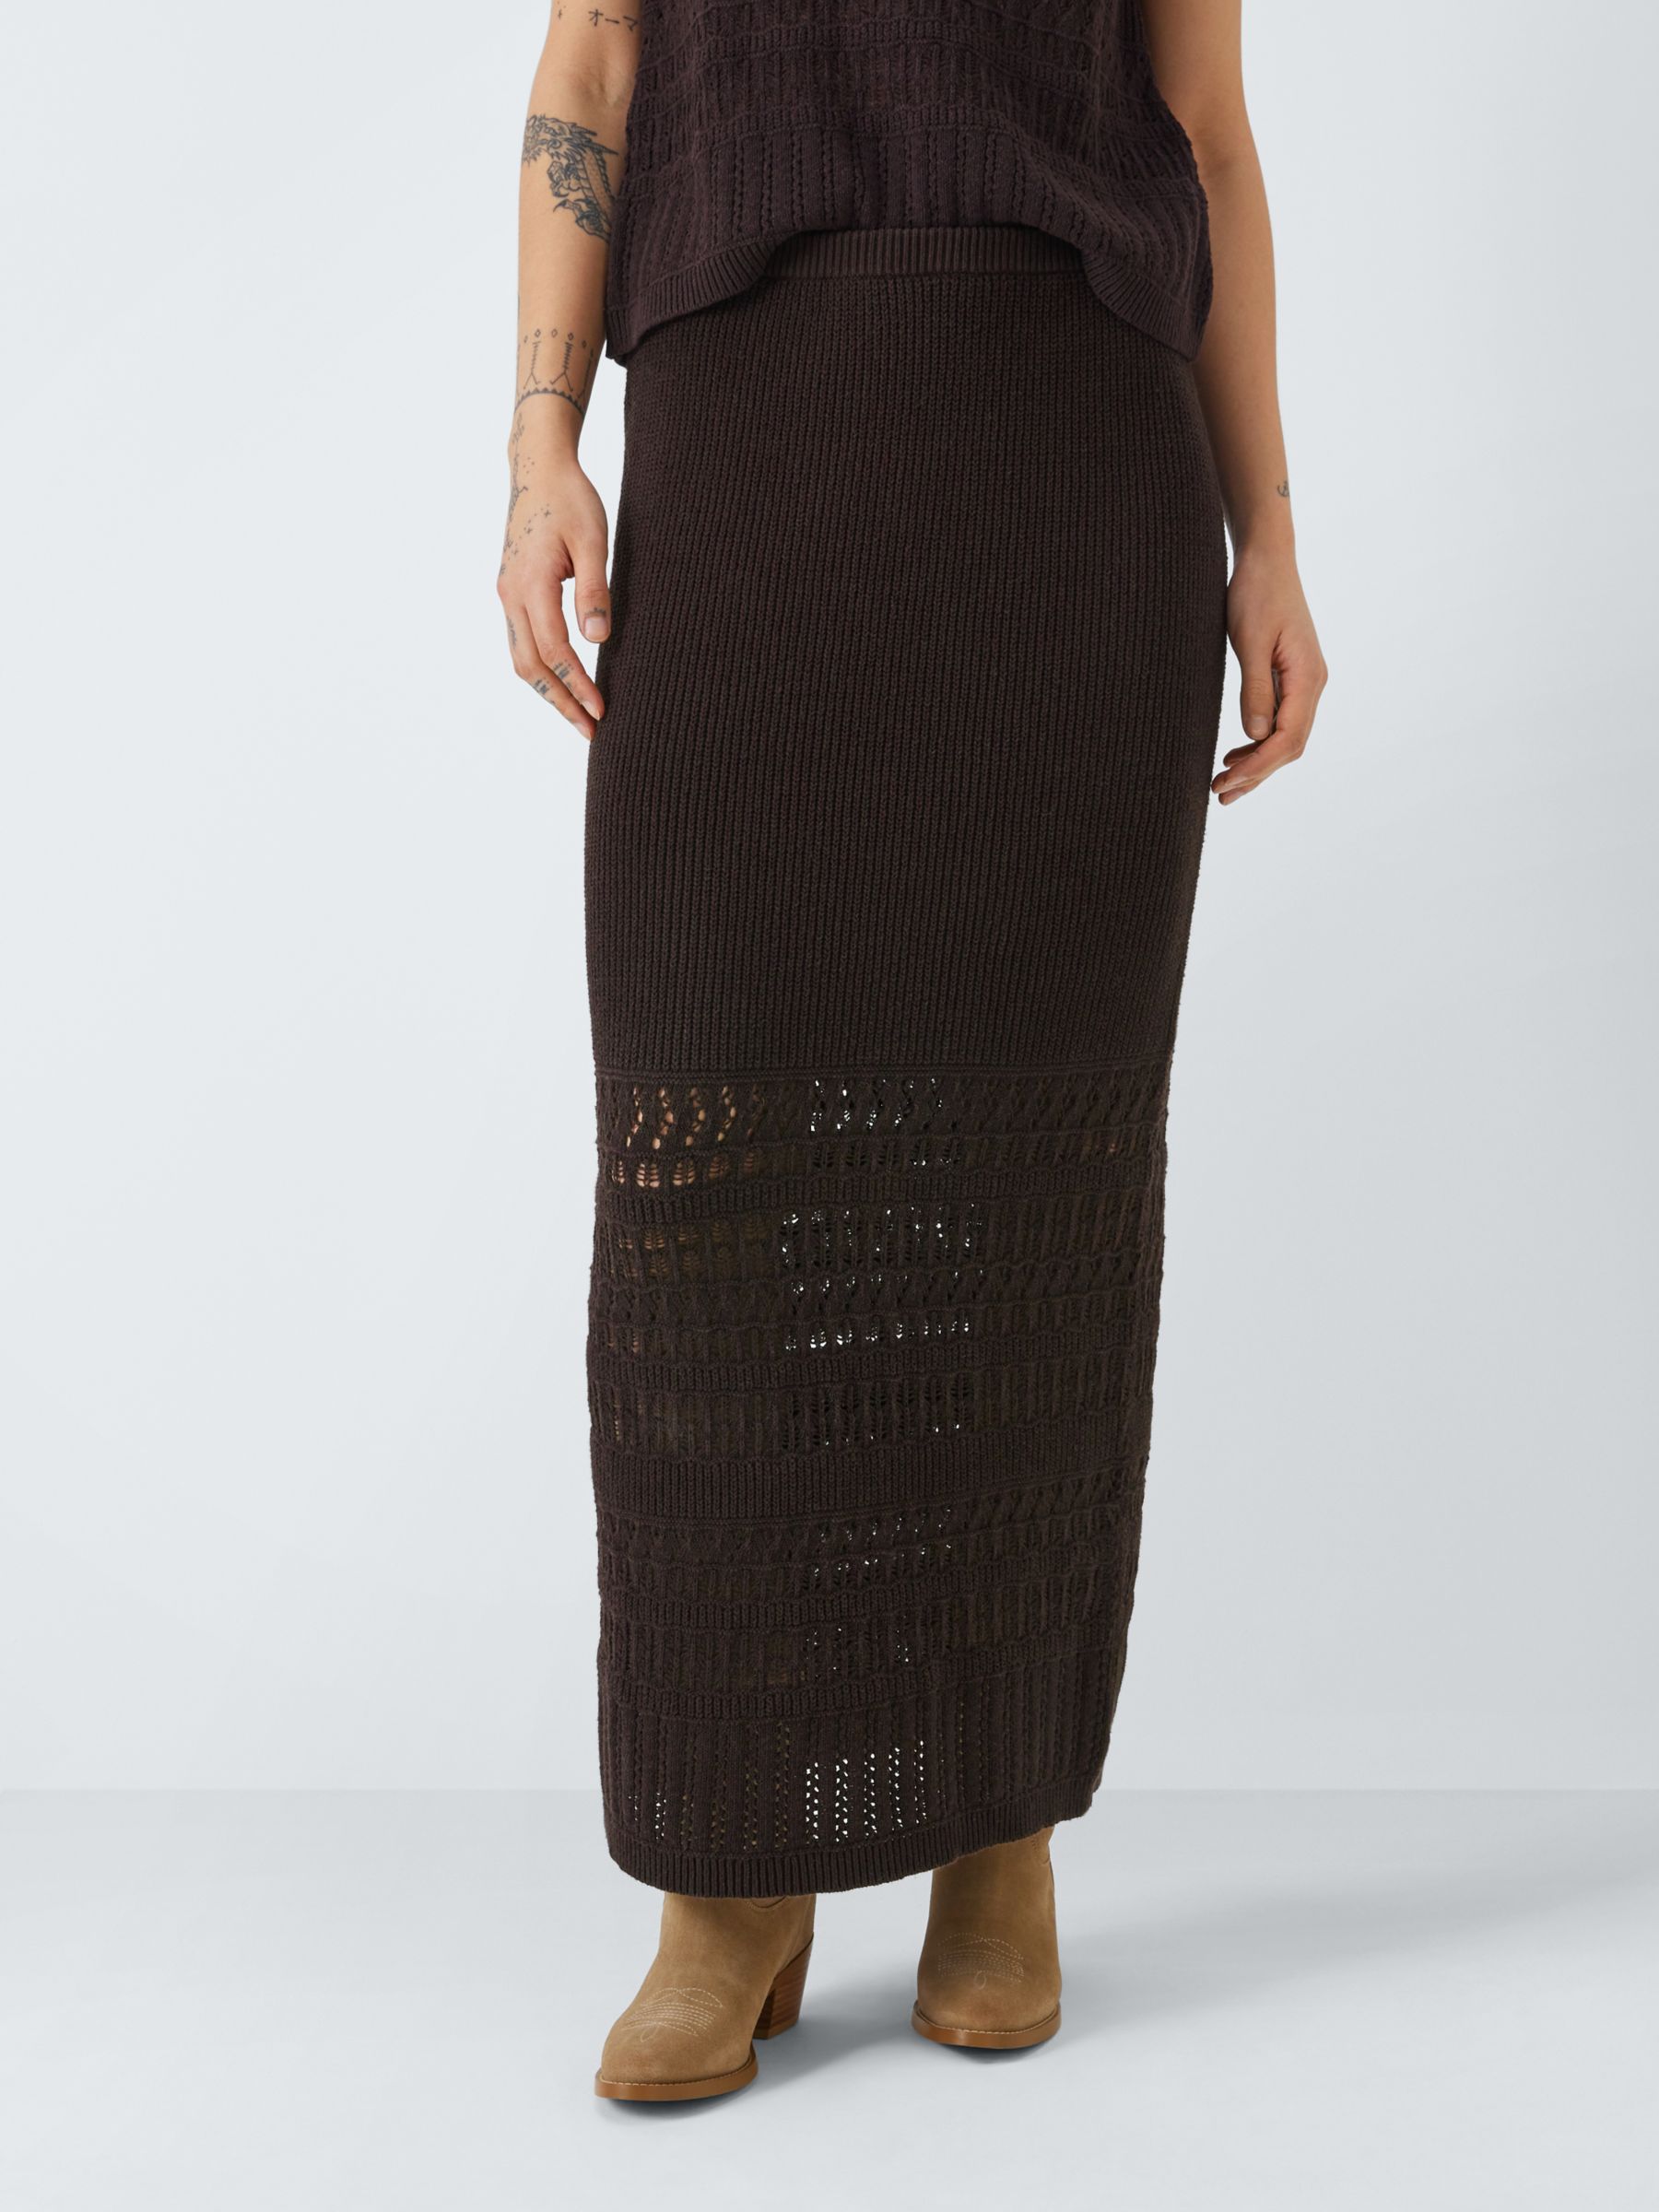 AND/OR Aria Knitted Maxi Skirt, Dark Chocolate, 8